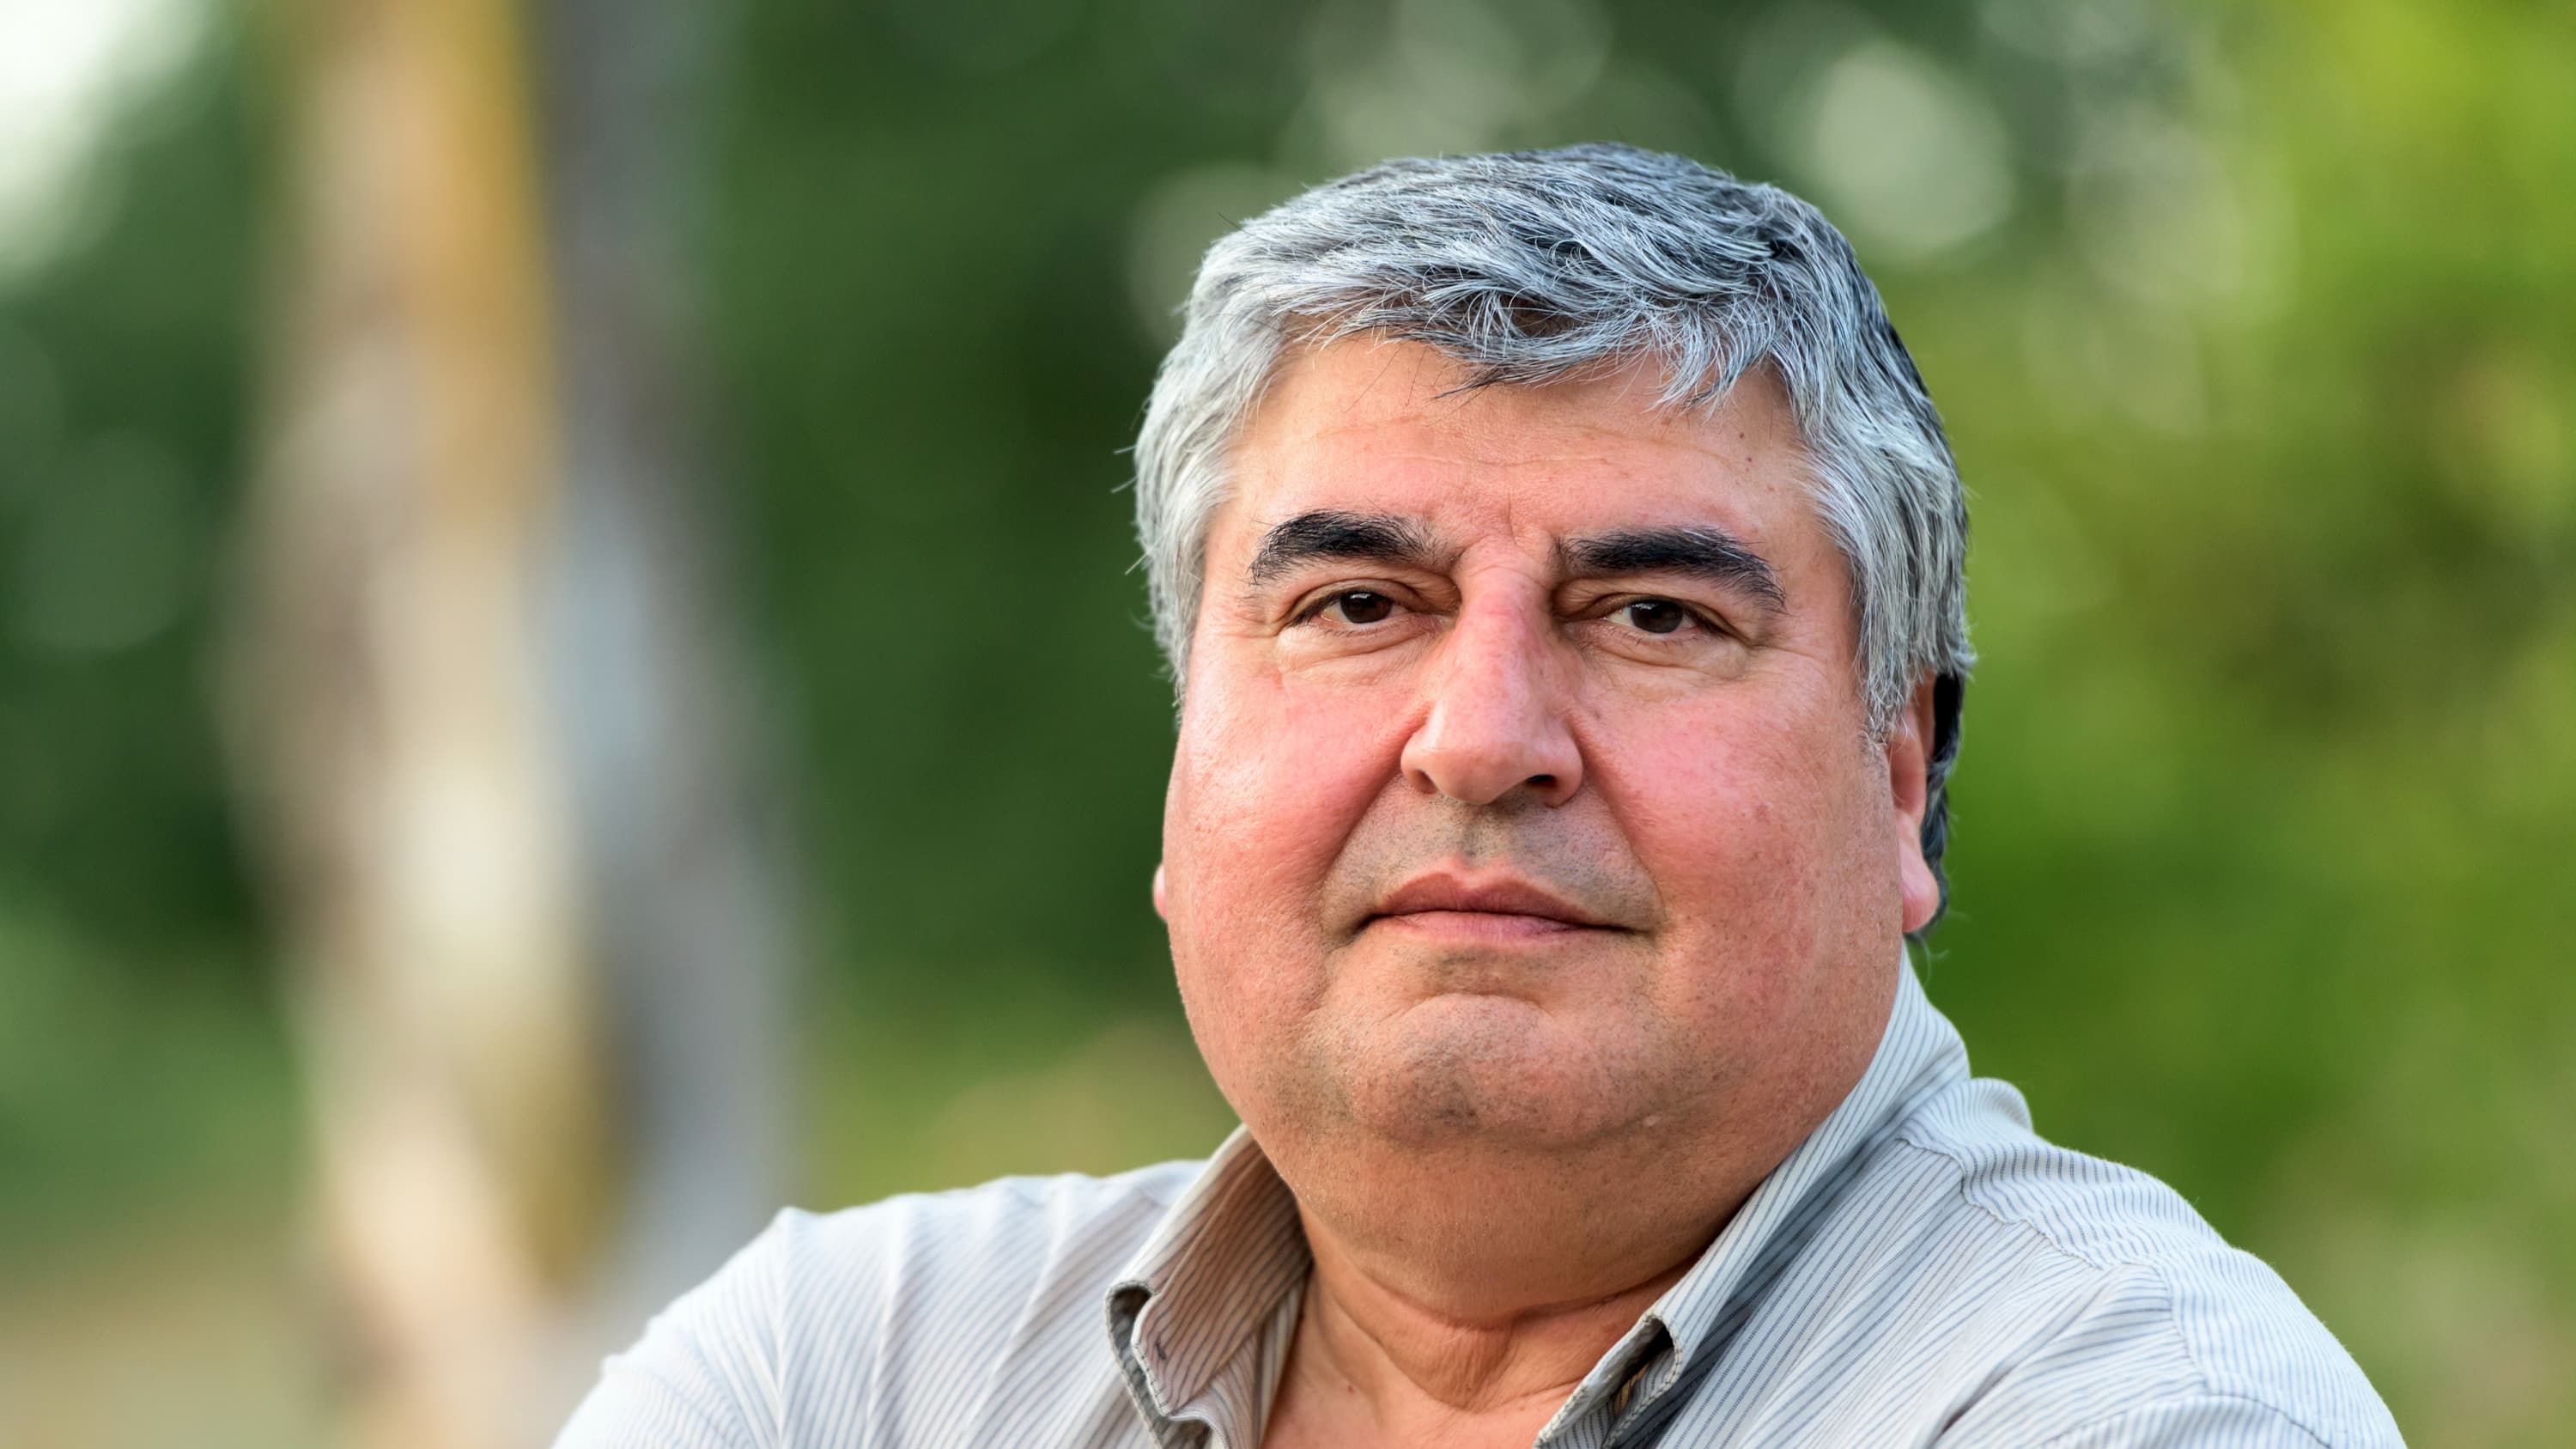 An overweight man who may have peripheral artery disease looks into the camera. He is wearing a grey polo shirt against a green, leafy background.